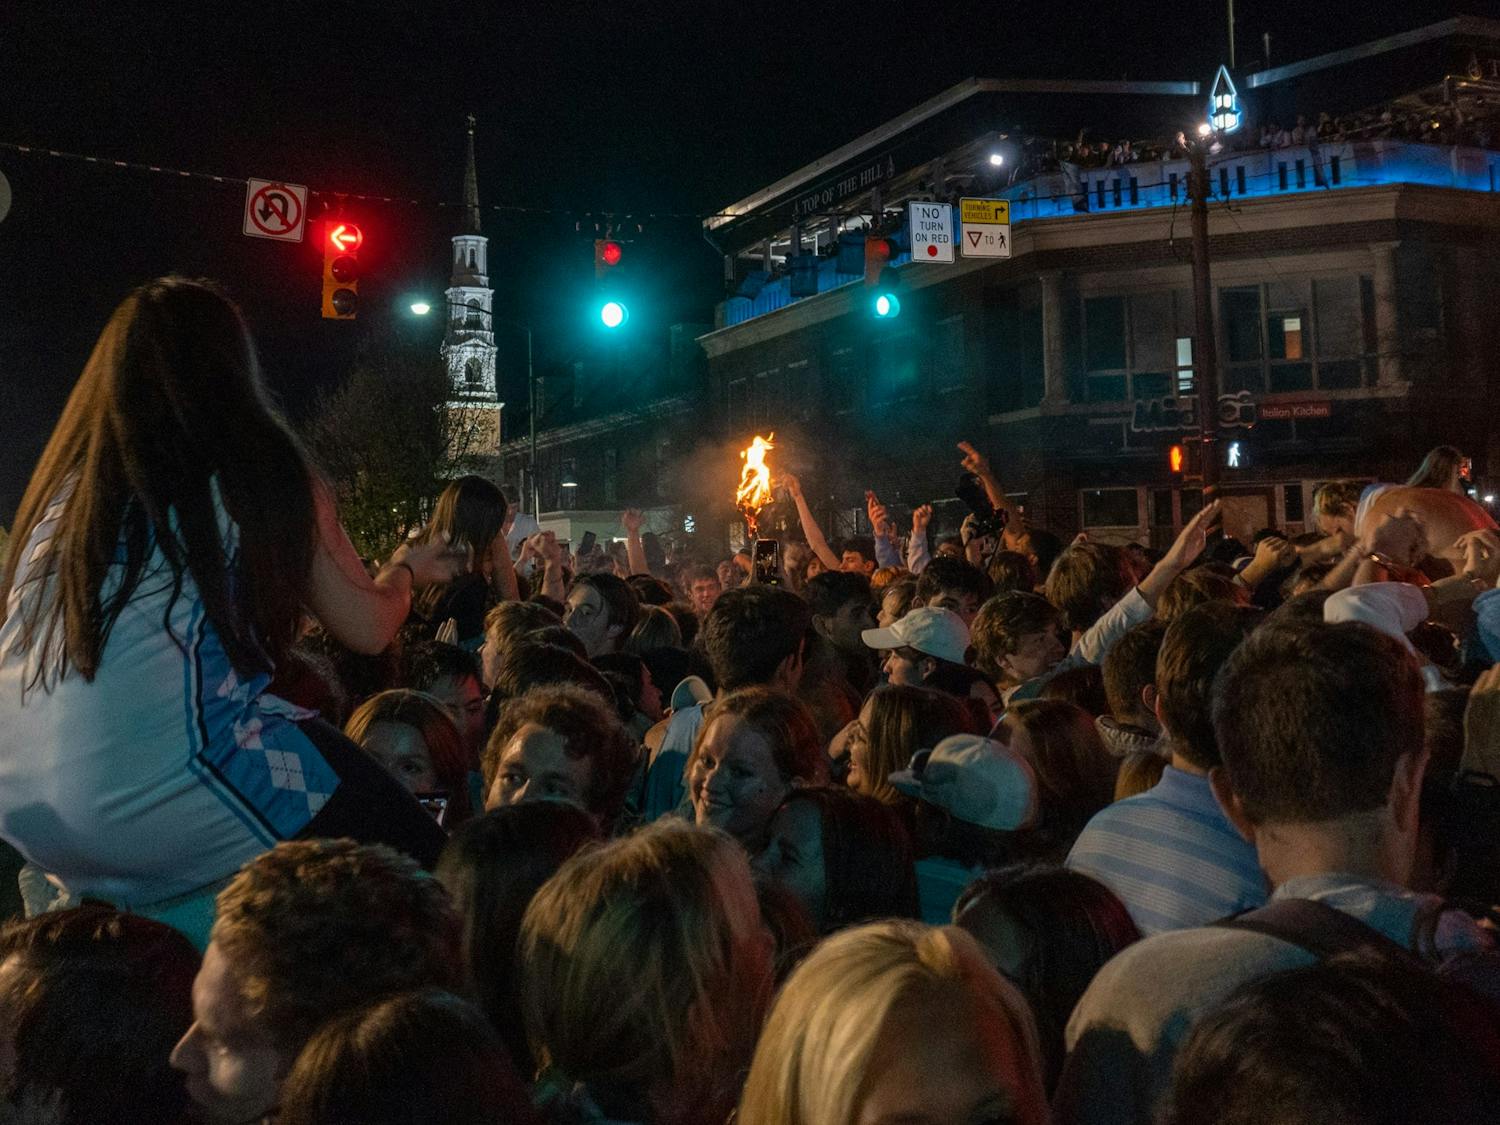 North Carolina men's basketball fans rush Franklin St. after a historic win over Duke in the Final Four game on Saturday, Apr. 2, 2022. UNC won 81-77.